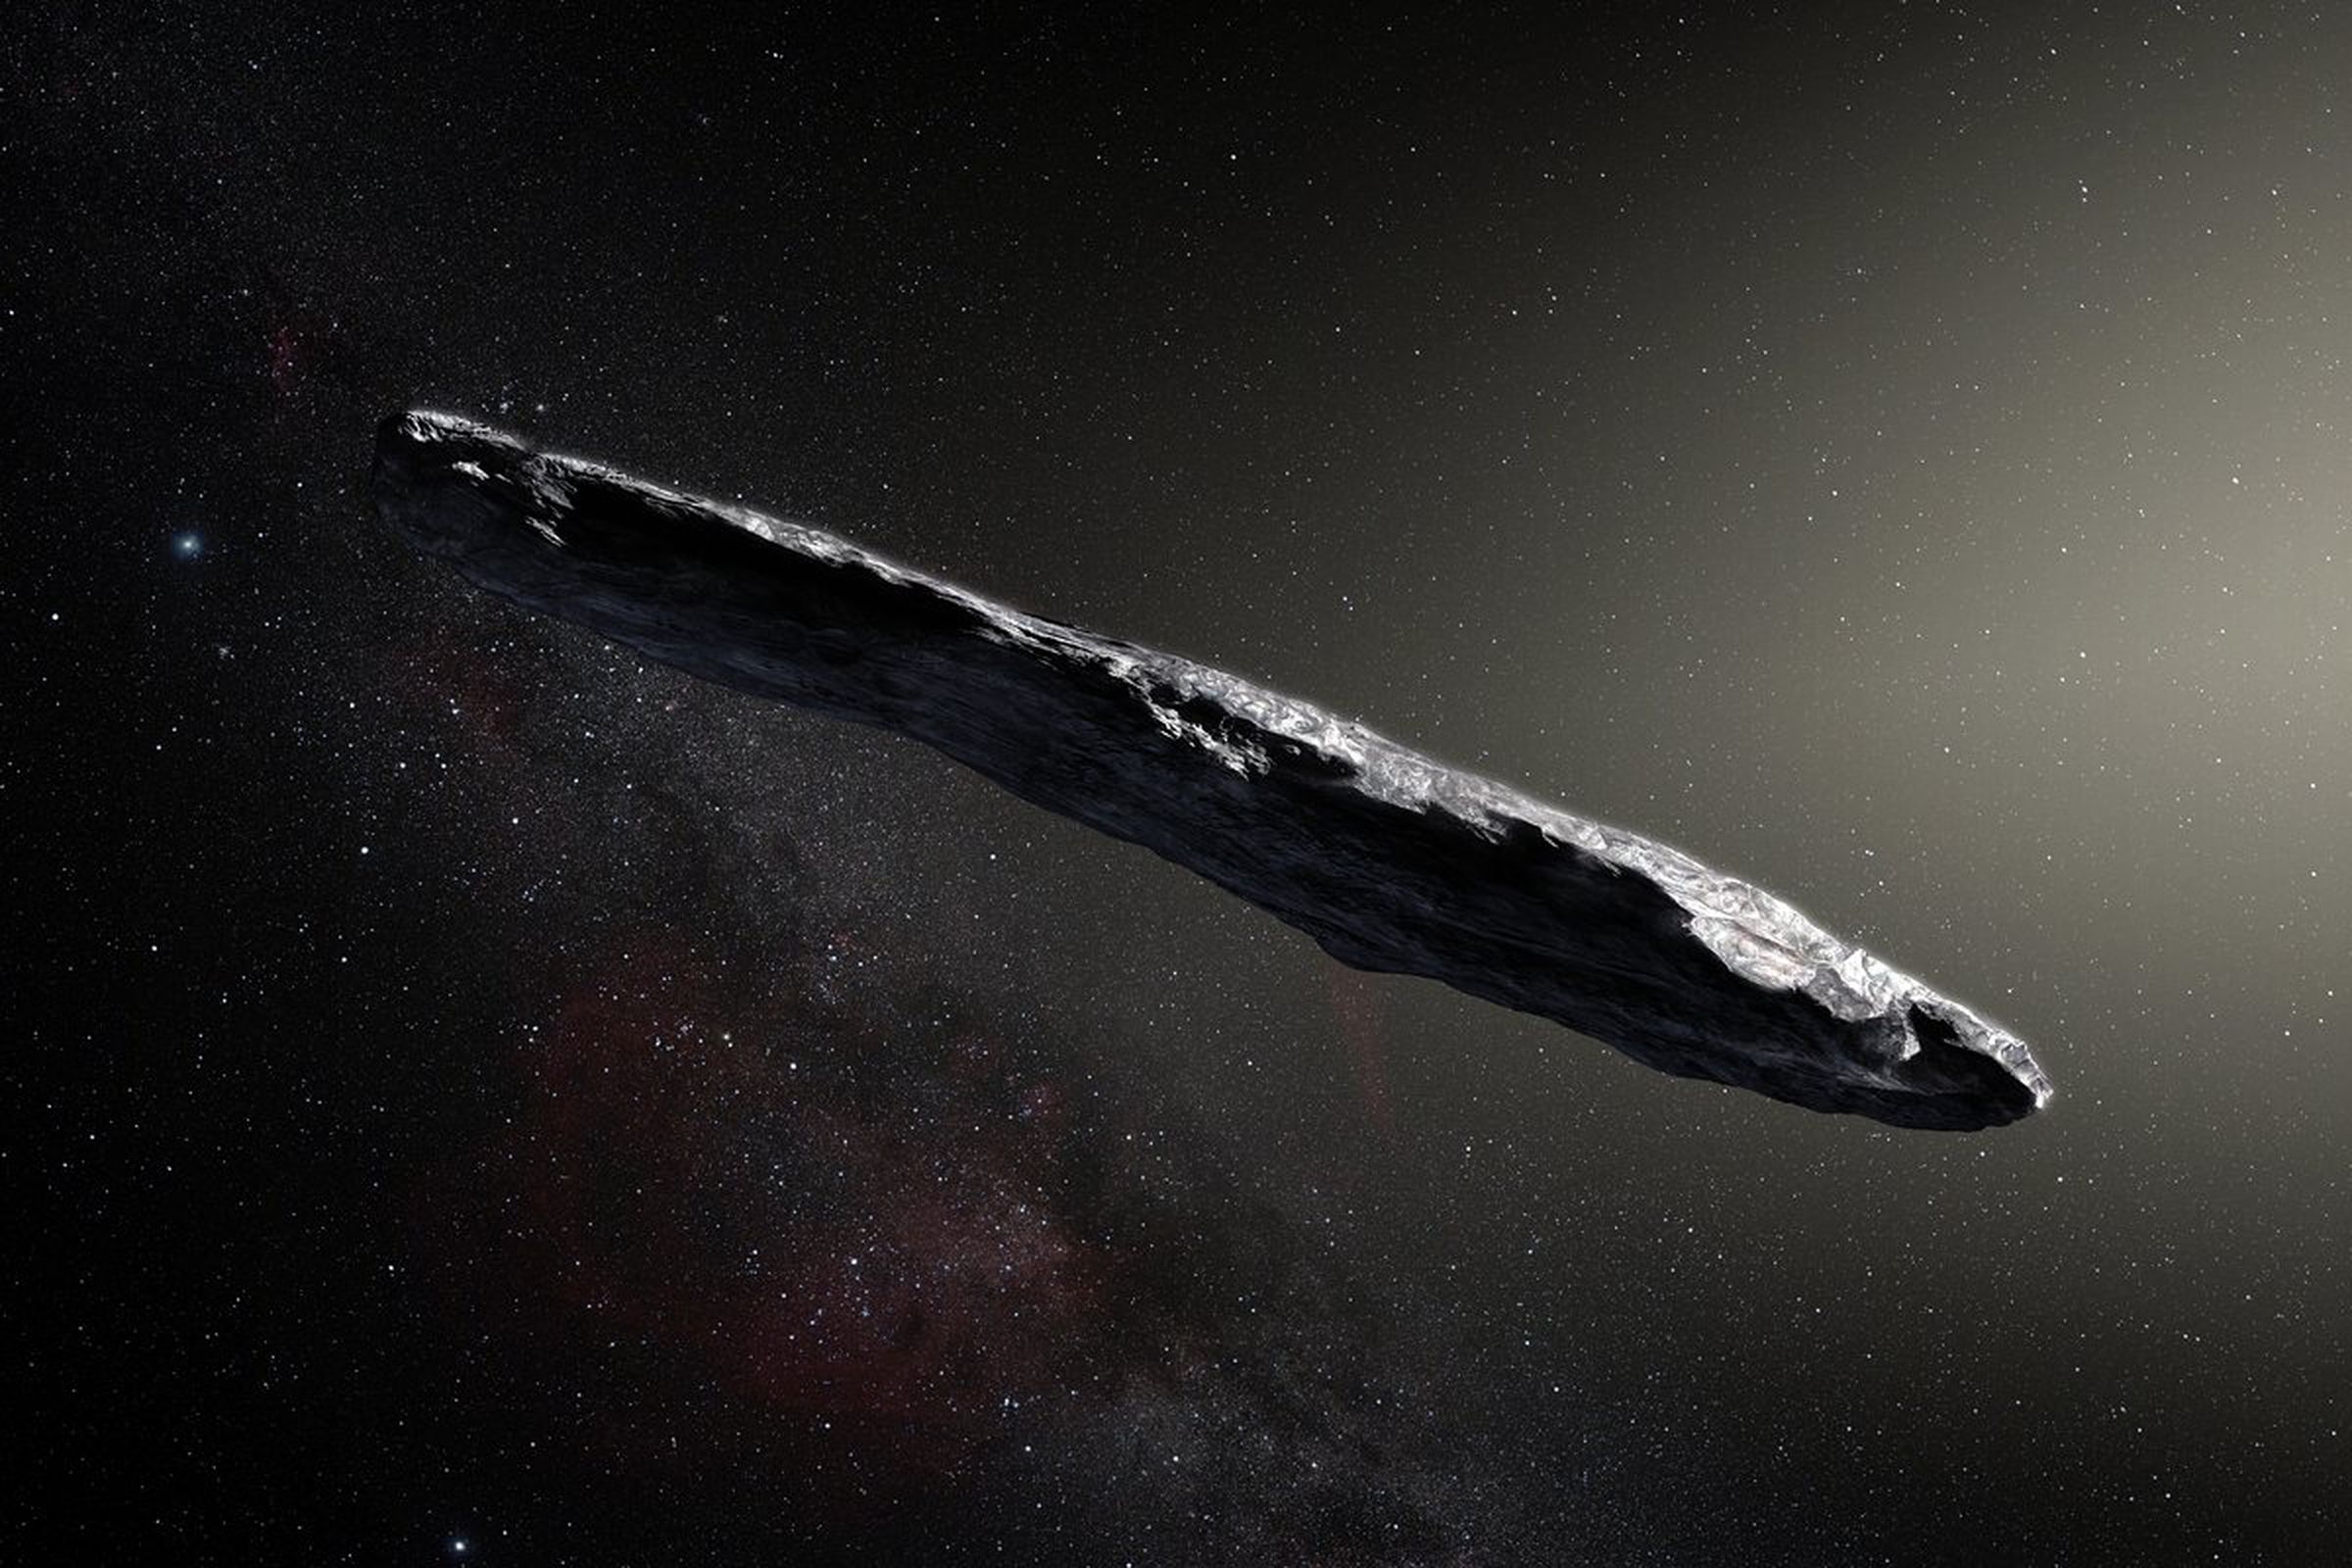 An artistic rendering of what `Oumuamua could look like, based on observations from Earth